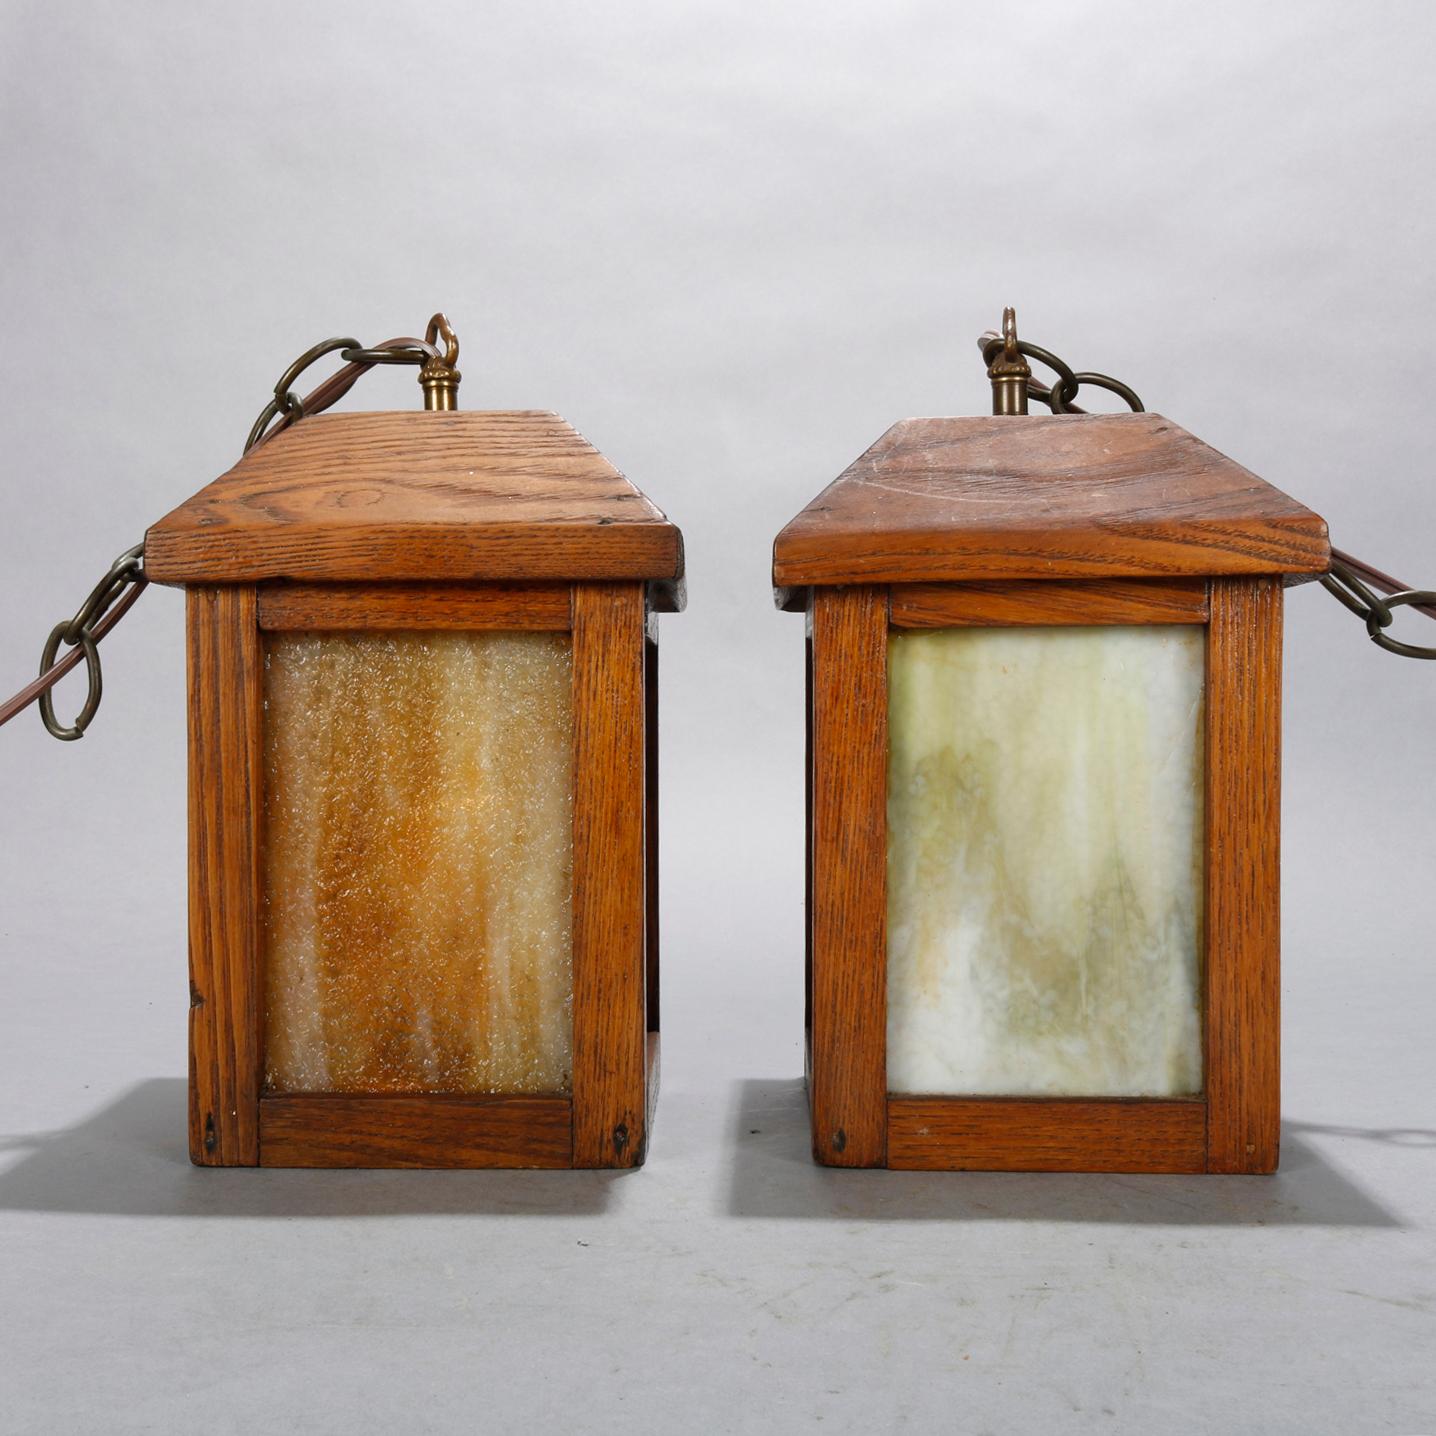 Carved Pair of Arts & Crafts Mission Oak and Slag Glass Hanging Lanterns, circa 1910